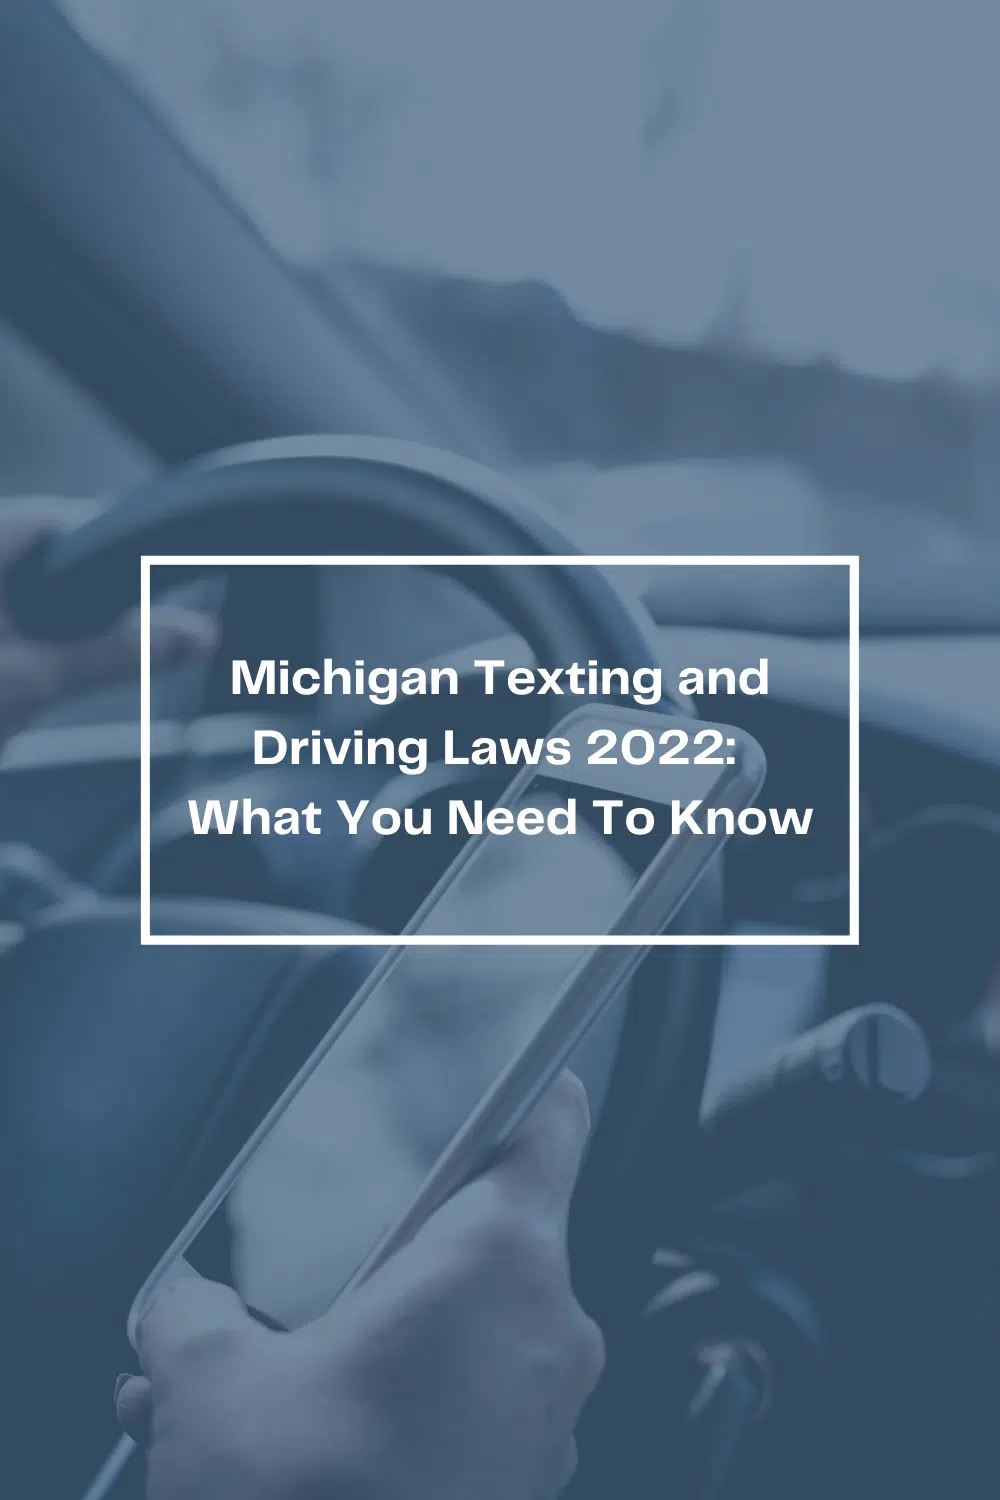 Michigan Texting and Driving Law 2022: What You Need To Know